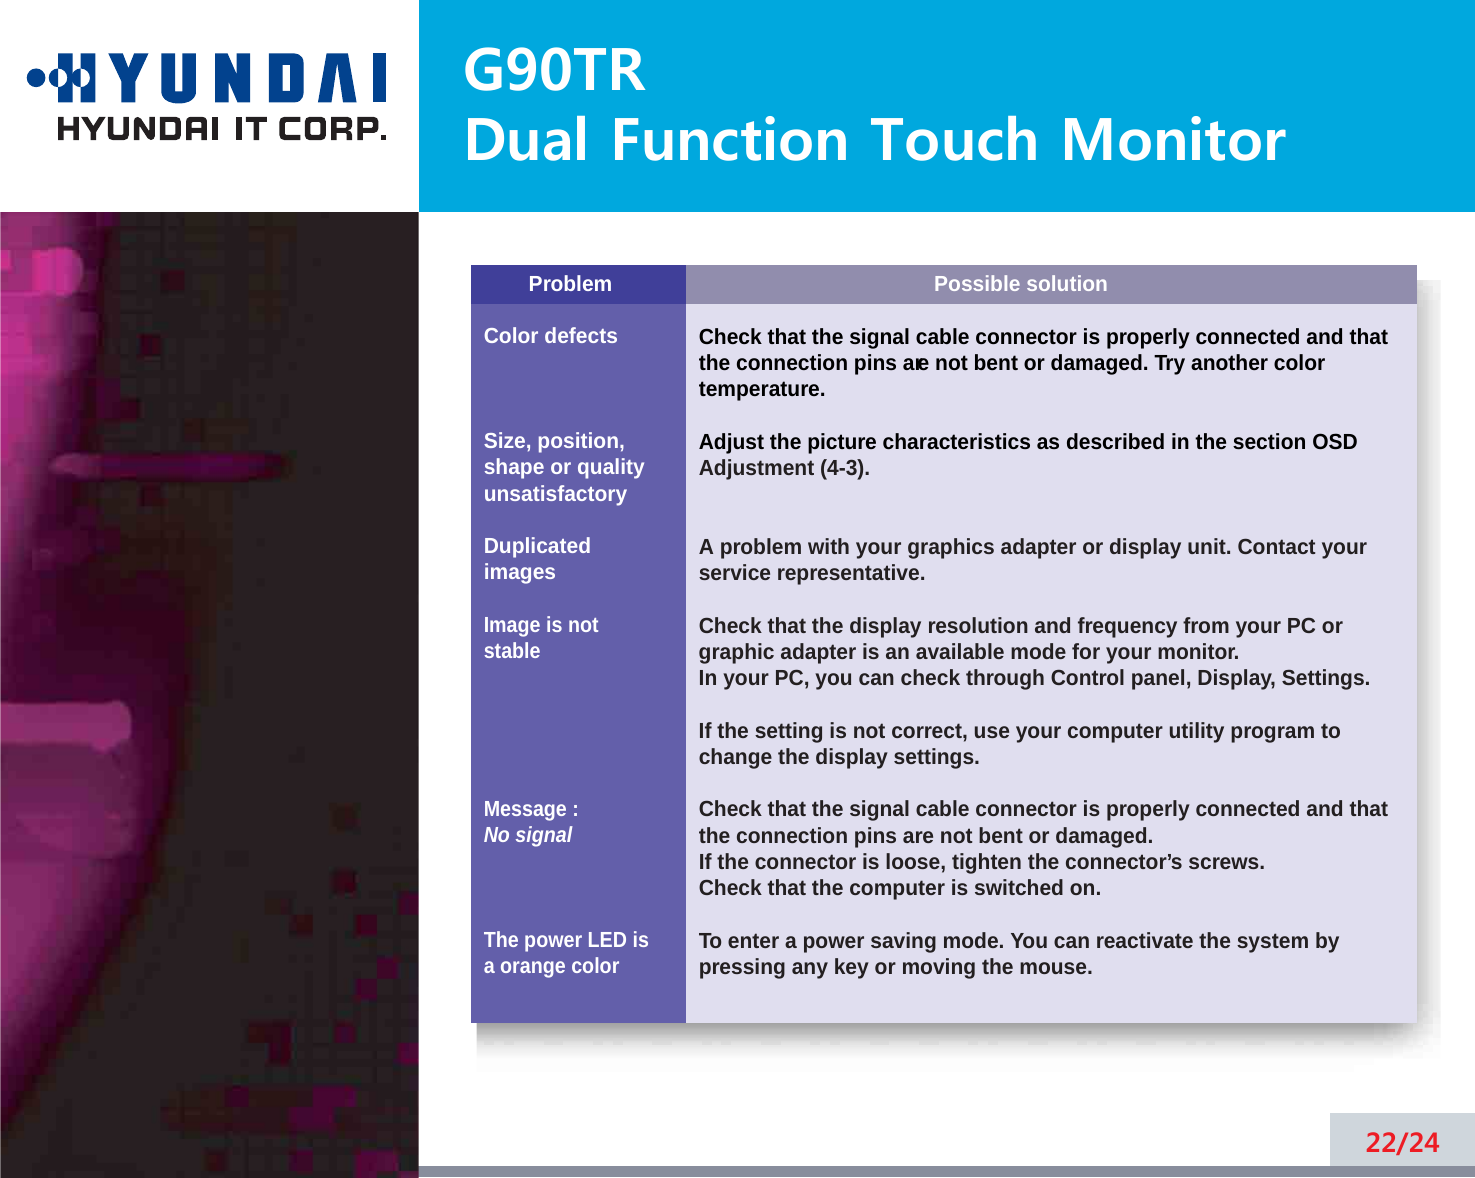 G90TRDual Function Touch Monitor22/24Possible solutionCheck that the signal cable connector is properly connected and thatthe connection pins are not bent or damaged. Try another colortemperature. Adjust the picture characteristics as described in the section OSD Adjustment (4-3).A problem with your graphics adapter or display unit. Contact yourservice representative.Check that the display resolution and frequency from your PC orgraphic adapter is an available mode for your monitor.In your PC, you can check through Control panel, Display, Settings.If the setting is not correct, use your computer utility program tochange the display settings.Check that the signal cable connector is properly connected and thatthe connection pins are not bent or damaged.If the connector is loose, tighten the connector’s screws.Check that the computer is switched on.To enter a power saving mode. You can reactivate the system bypressing any key or moving the mouse.ProblemColor defectsSize, position,shape or qualityunsatisfactoryDuplicatedimagesImage is notstableMessage : No signalThe power LED isa orange color